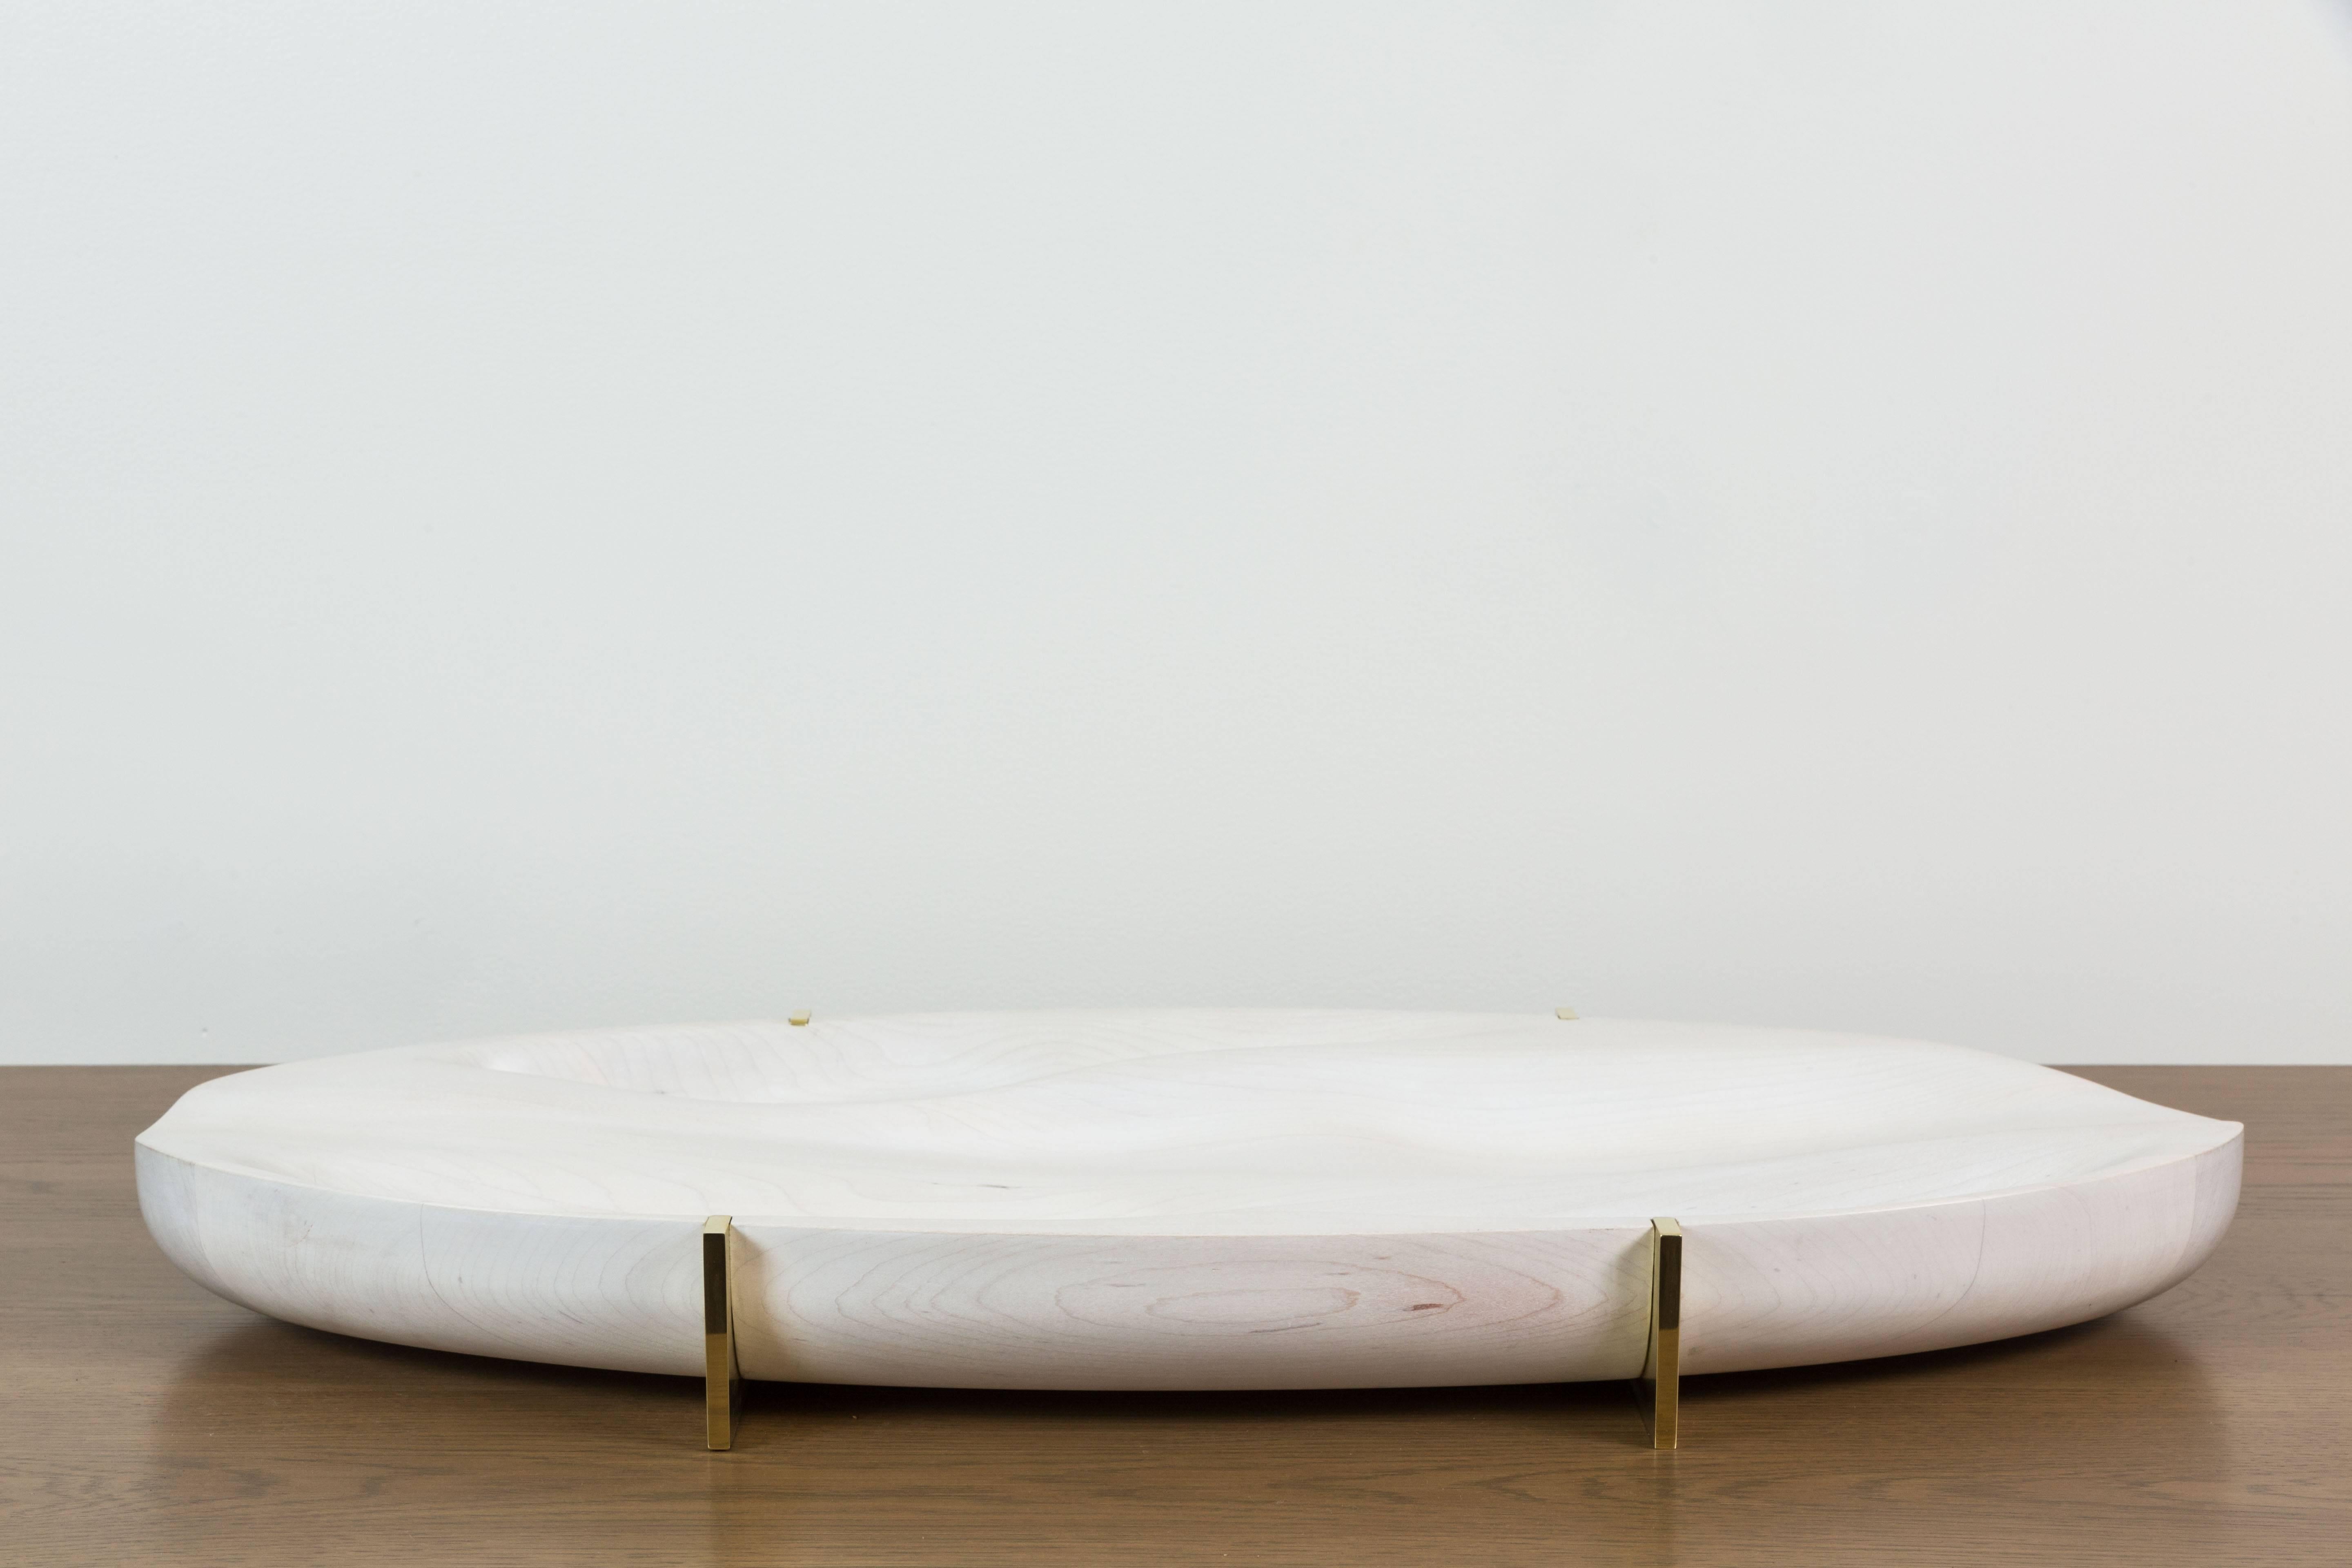 Bleached Maple and Brass Oval Tray by artist Vincent Pocsik in collaboration with Lawson-Fenning. Features sculptural carved wood and a machined brass base. Made of natural materials, this decorative object can be accessorized on table top, book